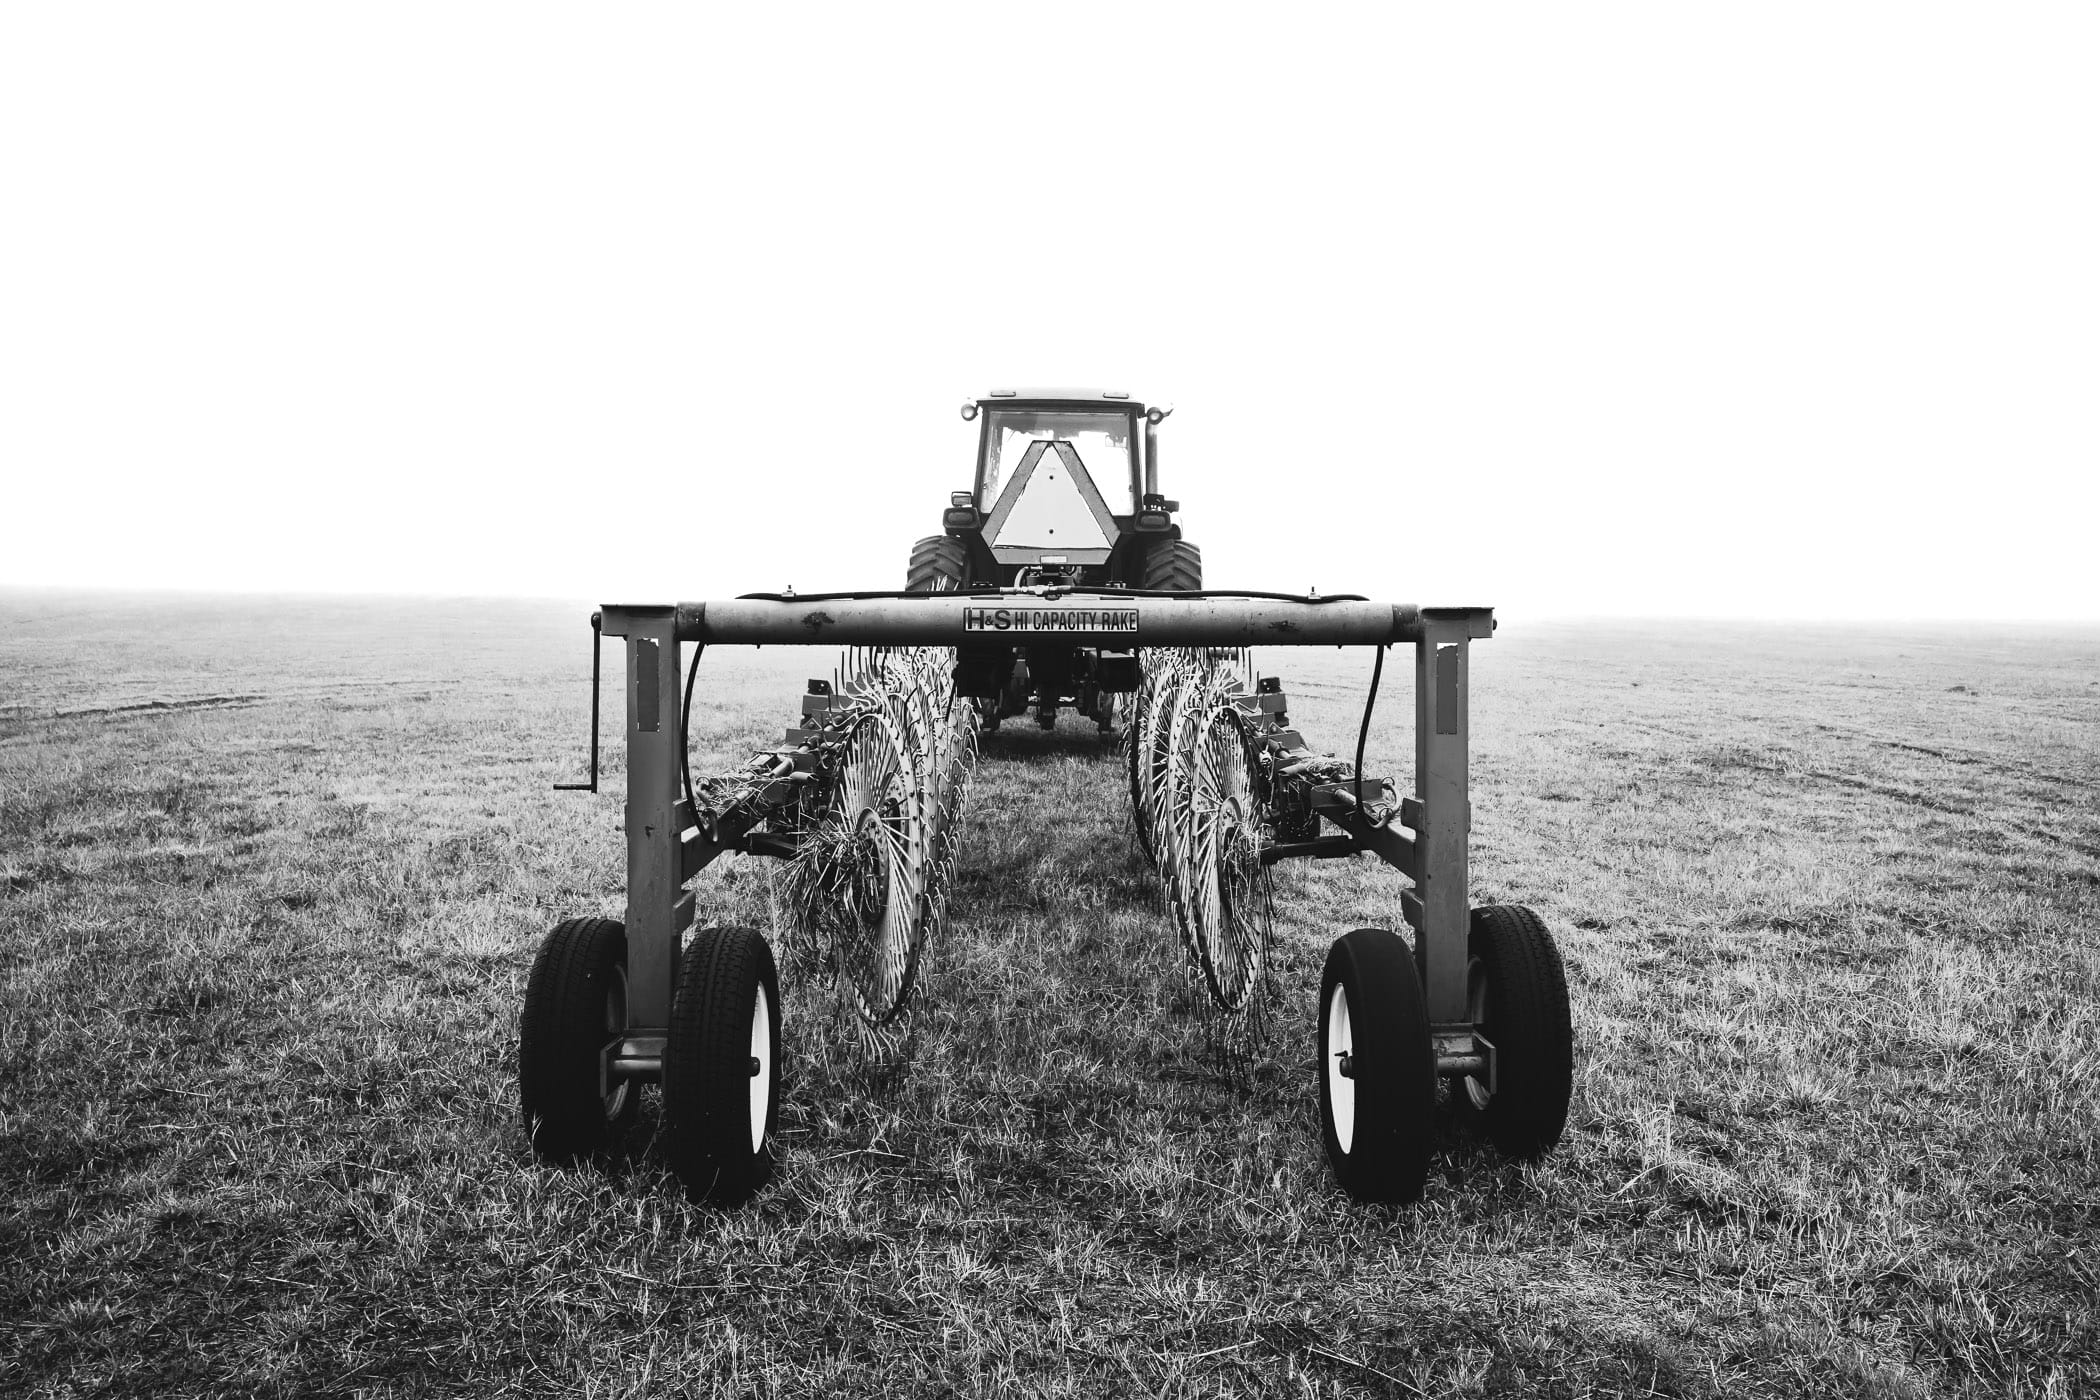 A tractor with a towed hay rake spotted on a foggy day at a North Texas farm.